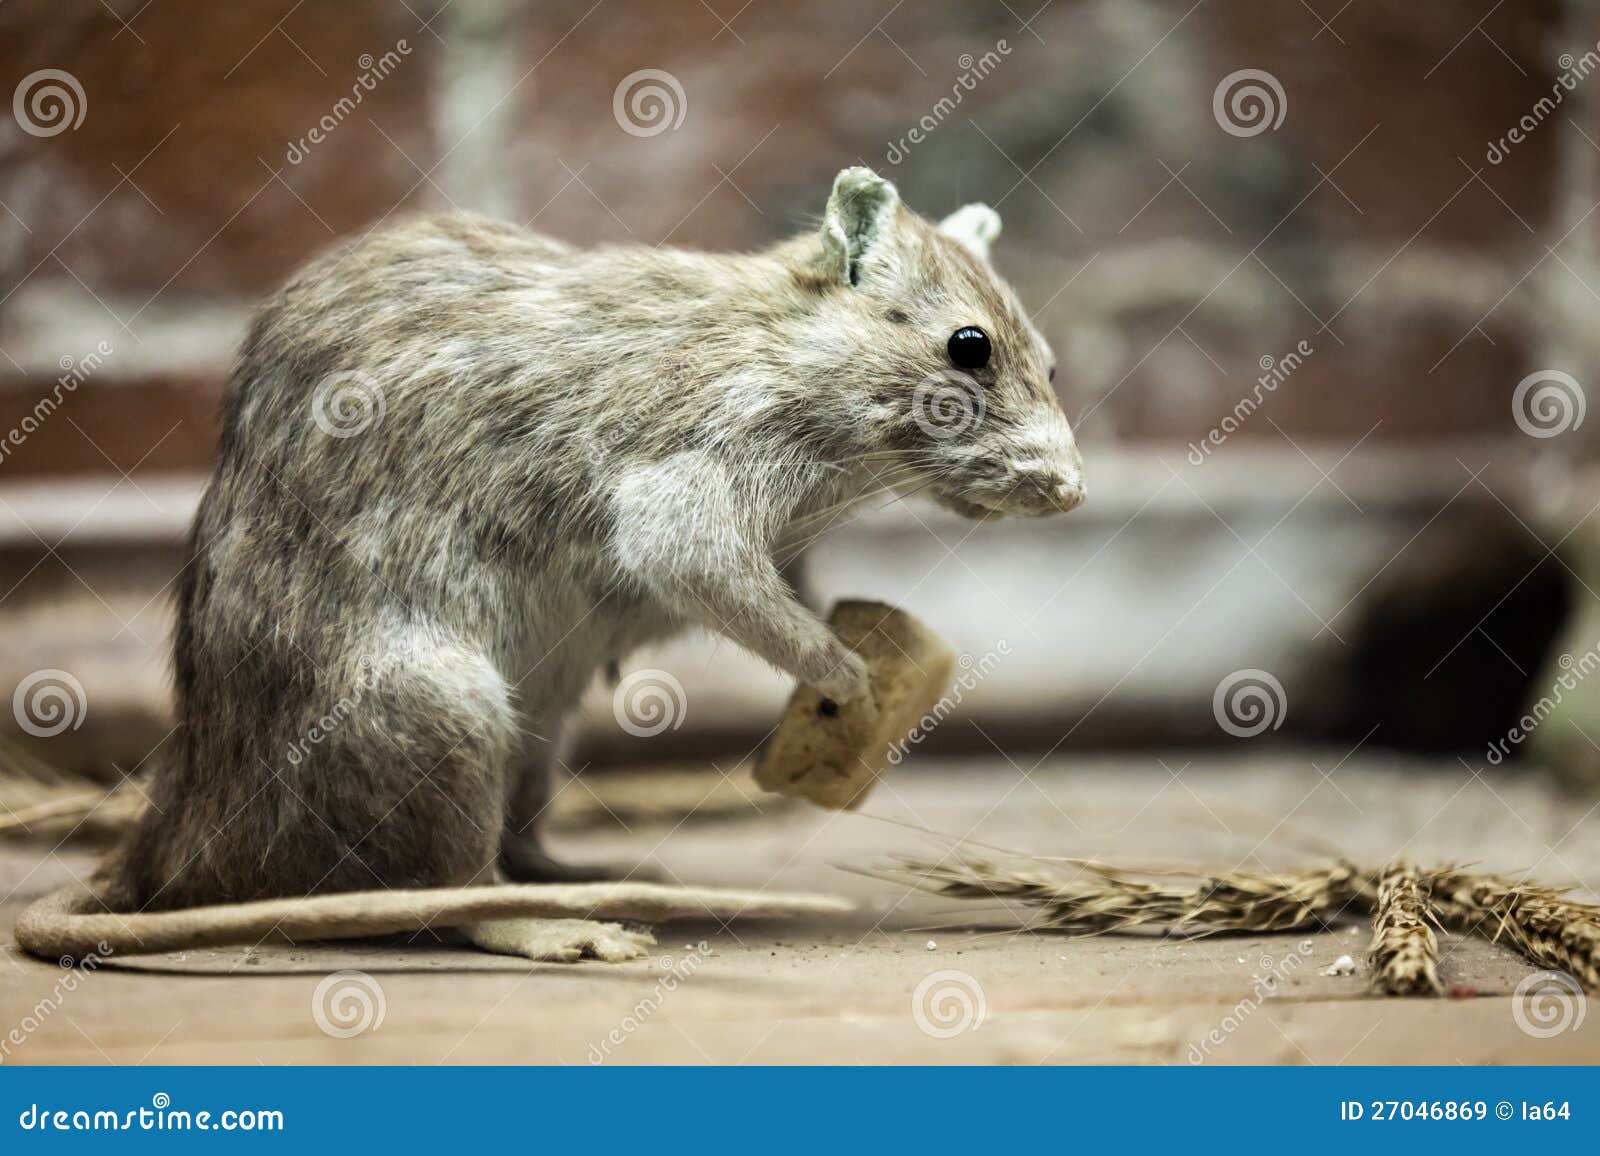 Rat Animal Eating Bread Food Stock Image - Image of product, hole: 27046869